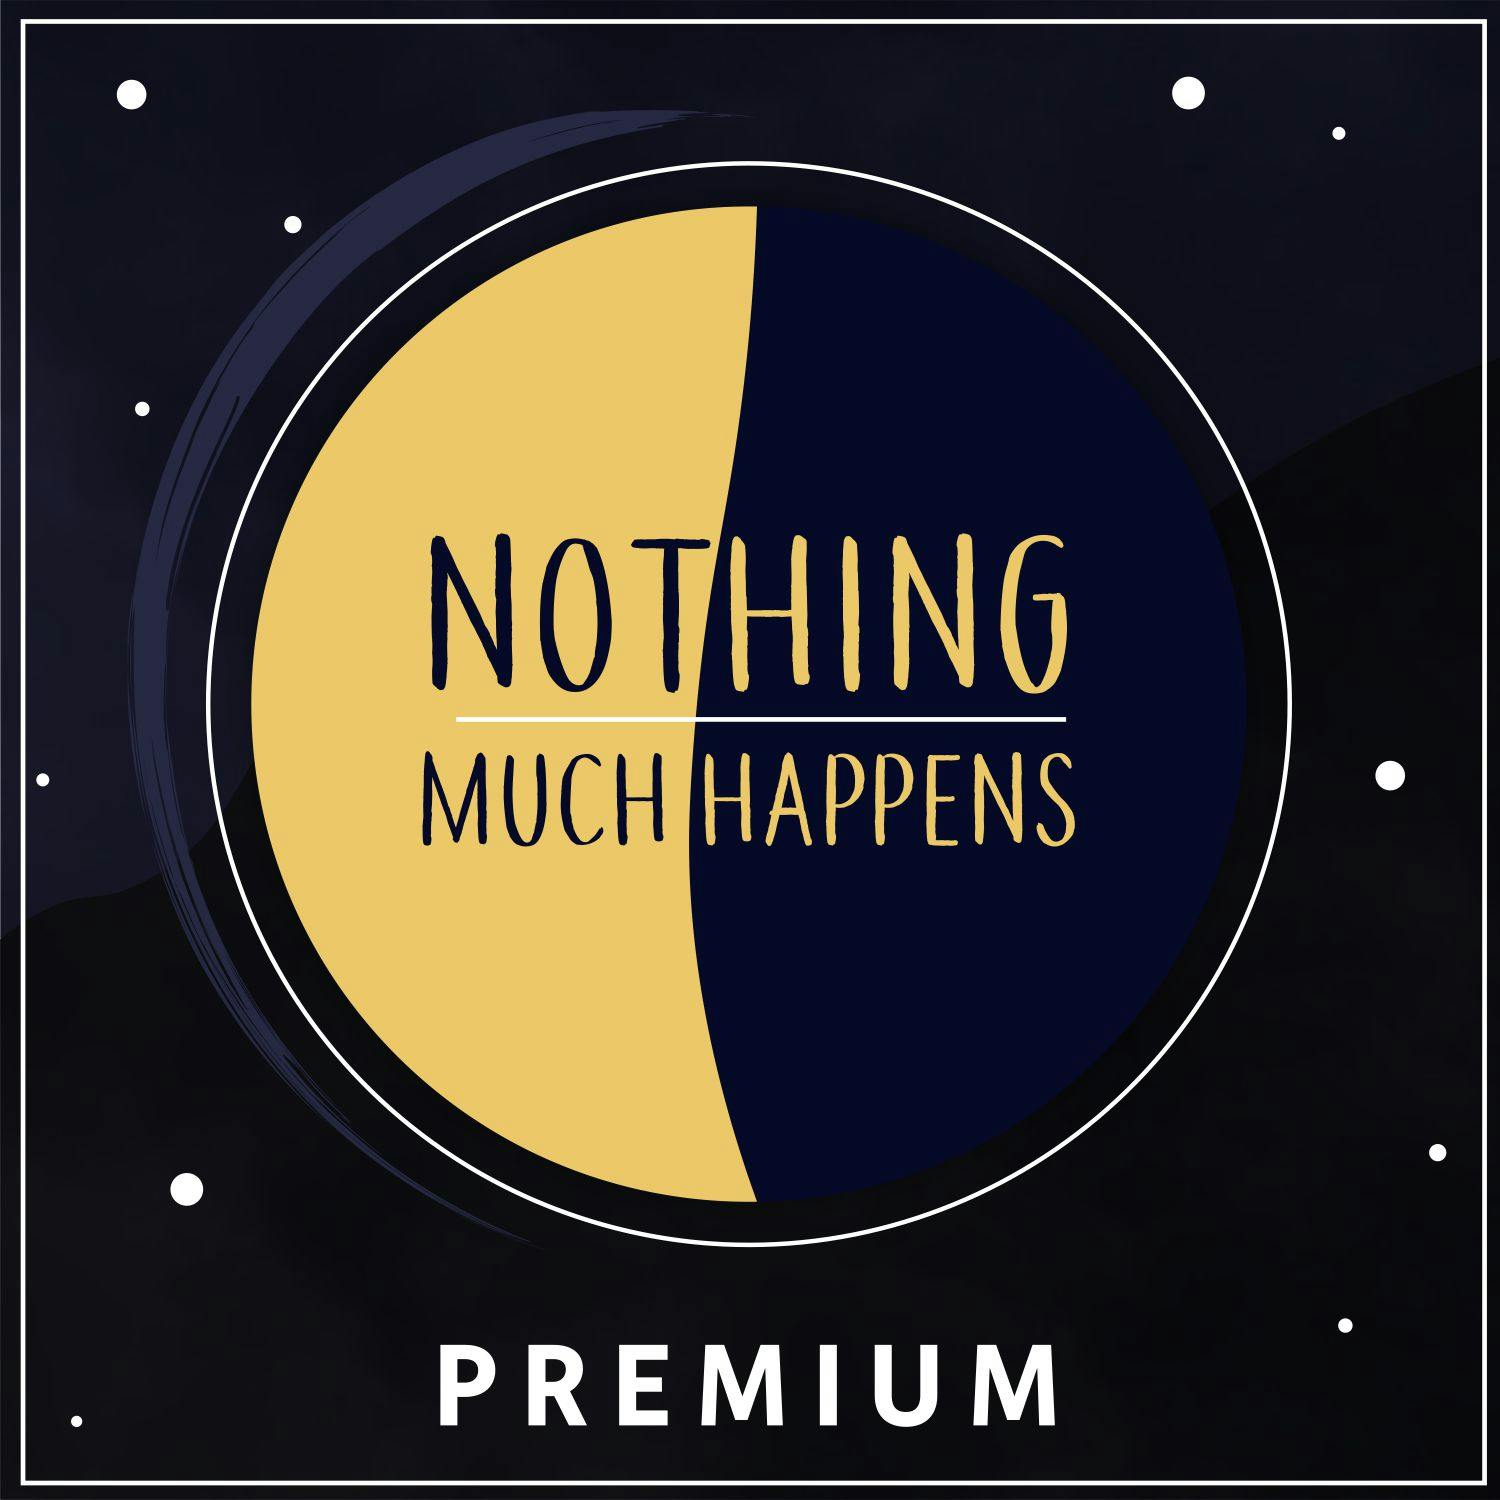 Nothing Much Happens Premium podcast tile